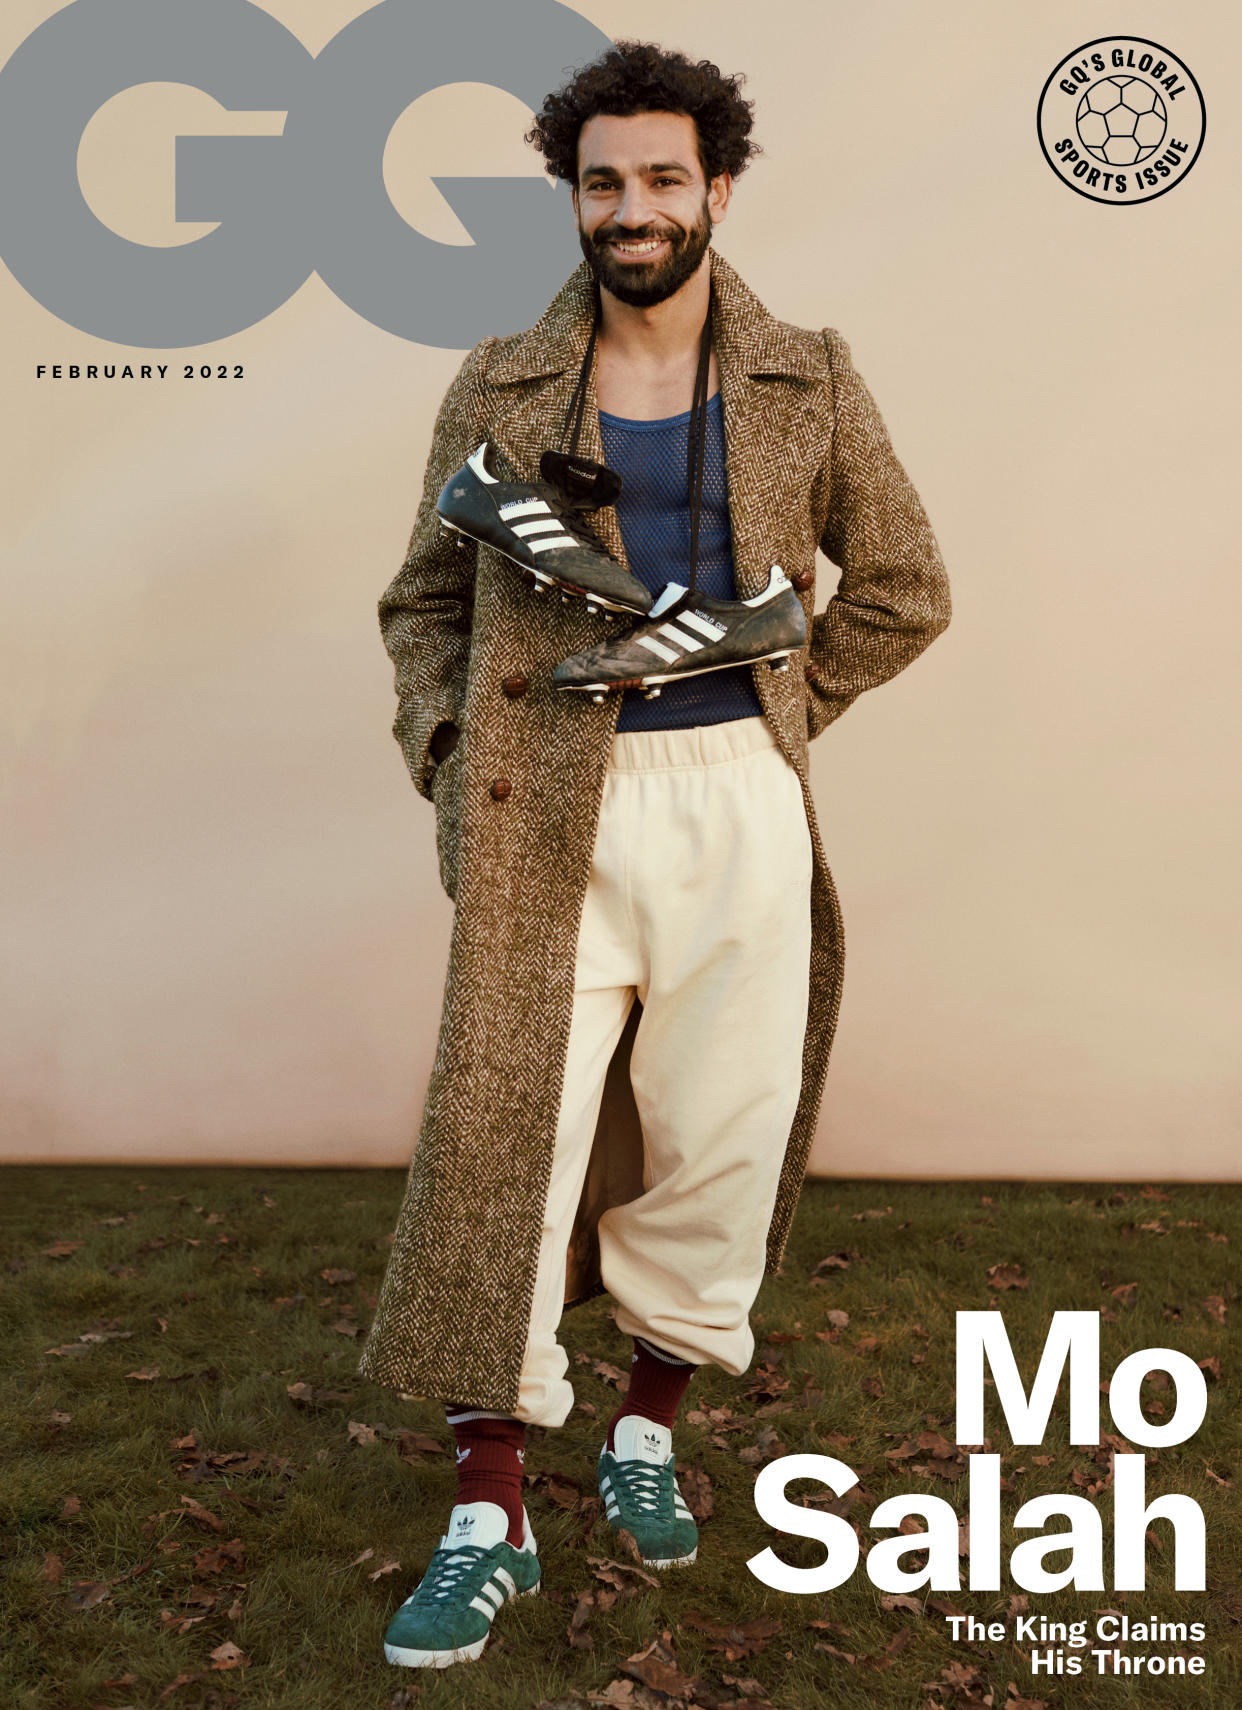 Mohamed Salah on the GQ global sports issue cover (Fanny Latour-Lambert/PA)